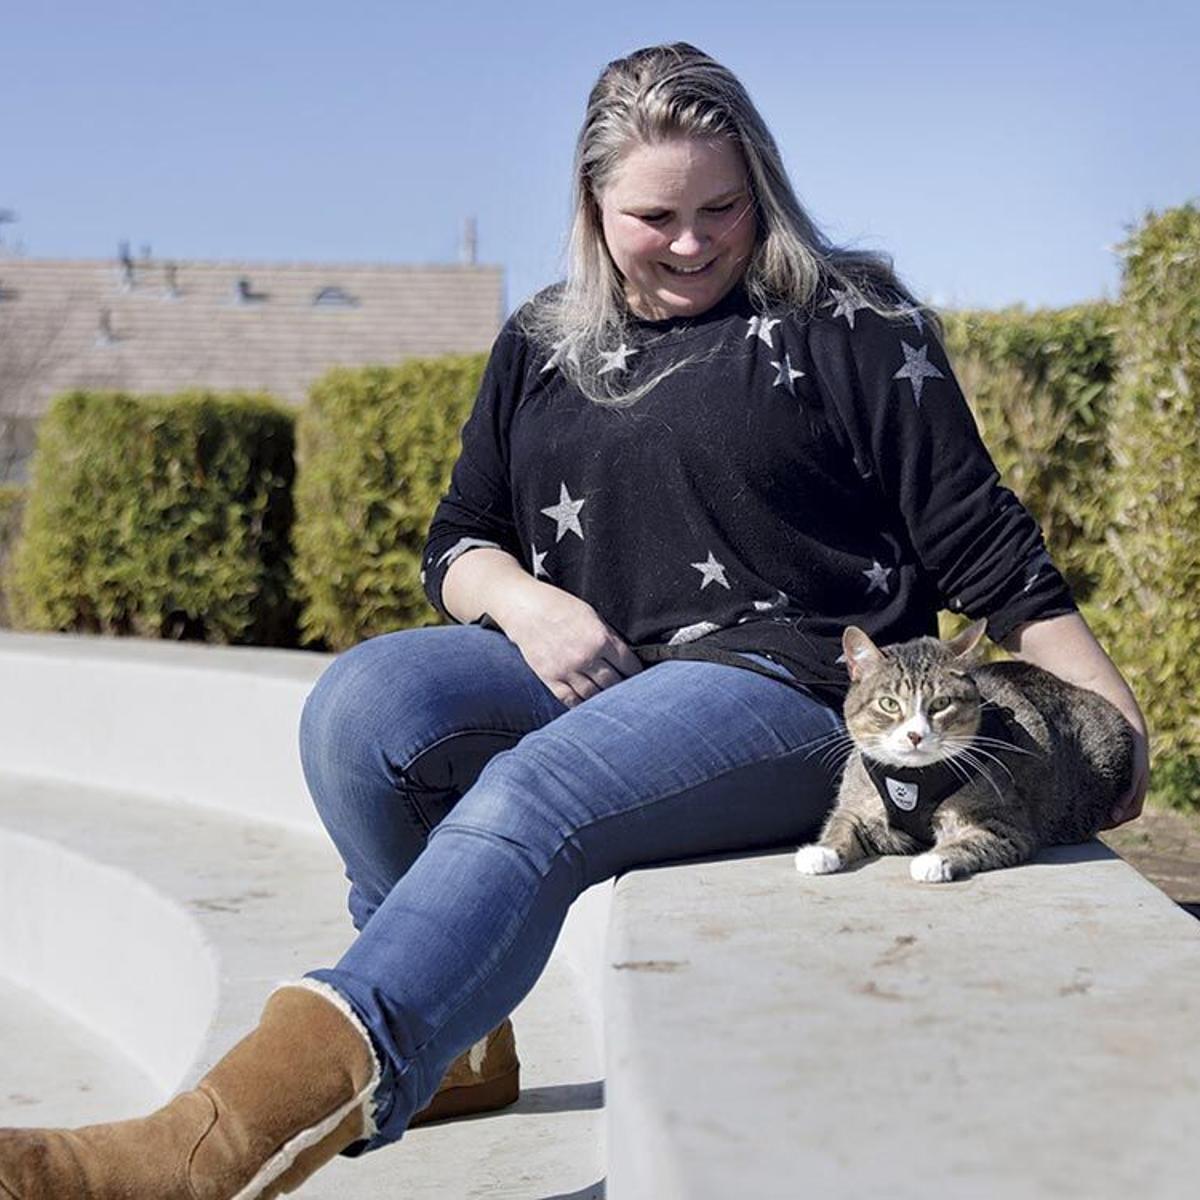 A small foundation that helps with medical costs for urgently ill animals  has found its niche. | 831 (Tales from the Area Code) |  